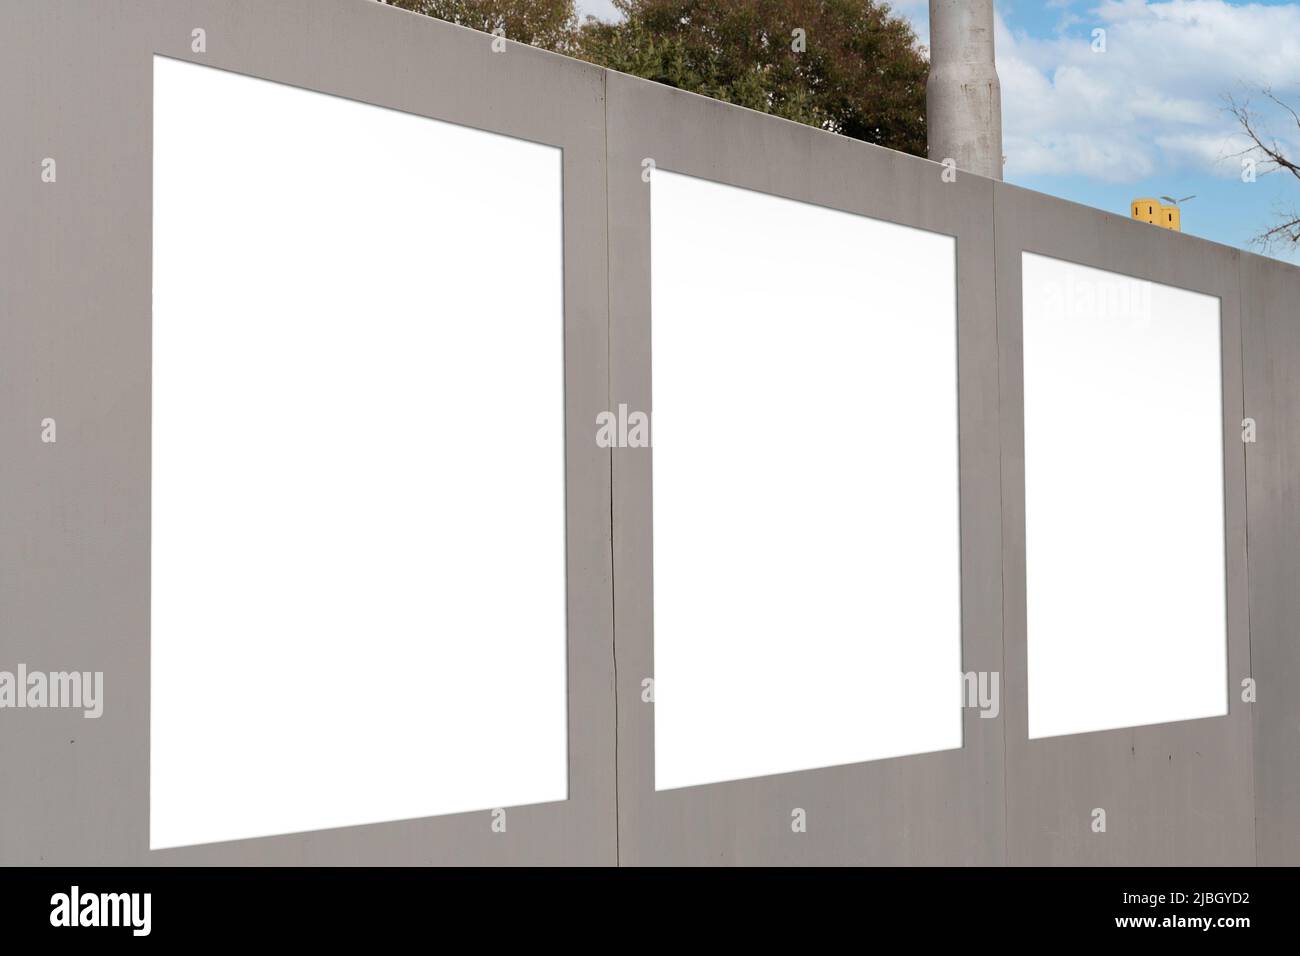 Concrete wall with three blanks for advertisements Stock Photo